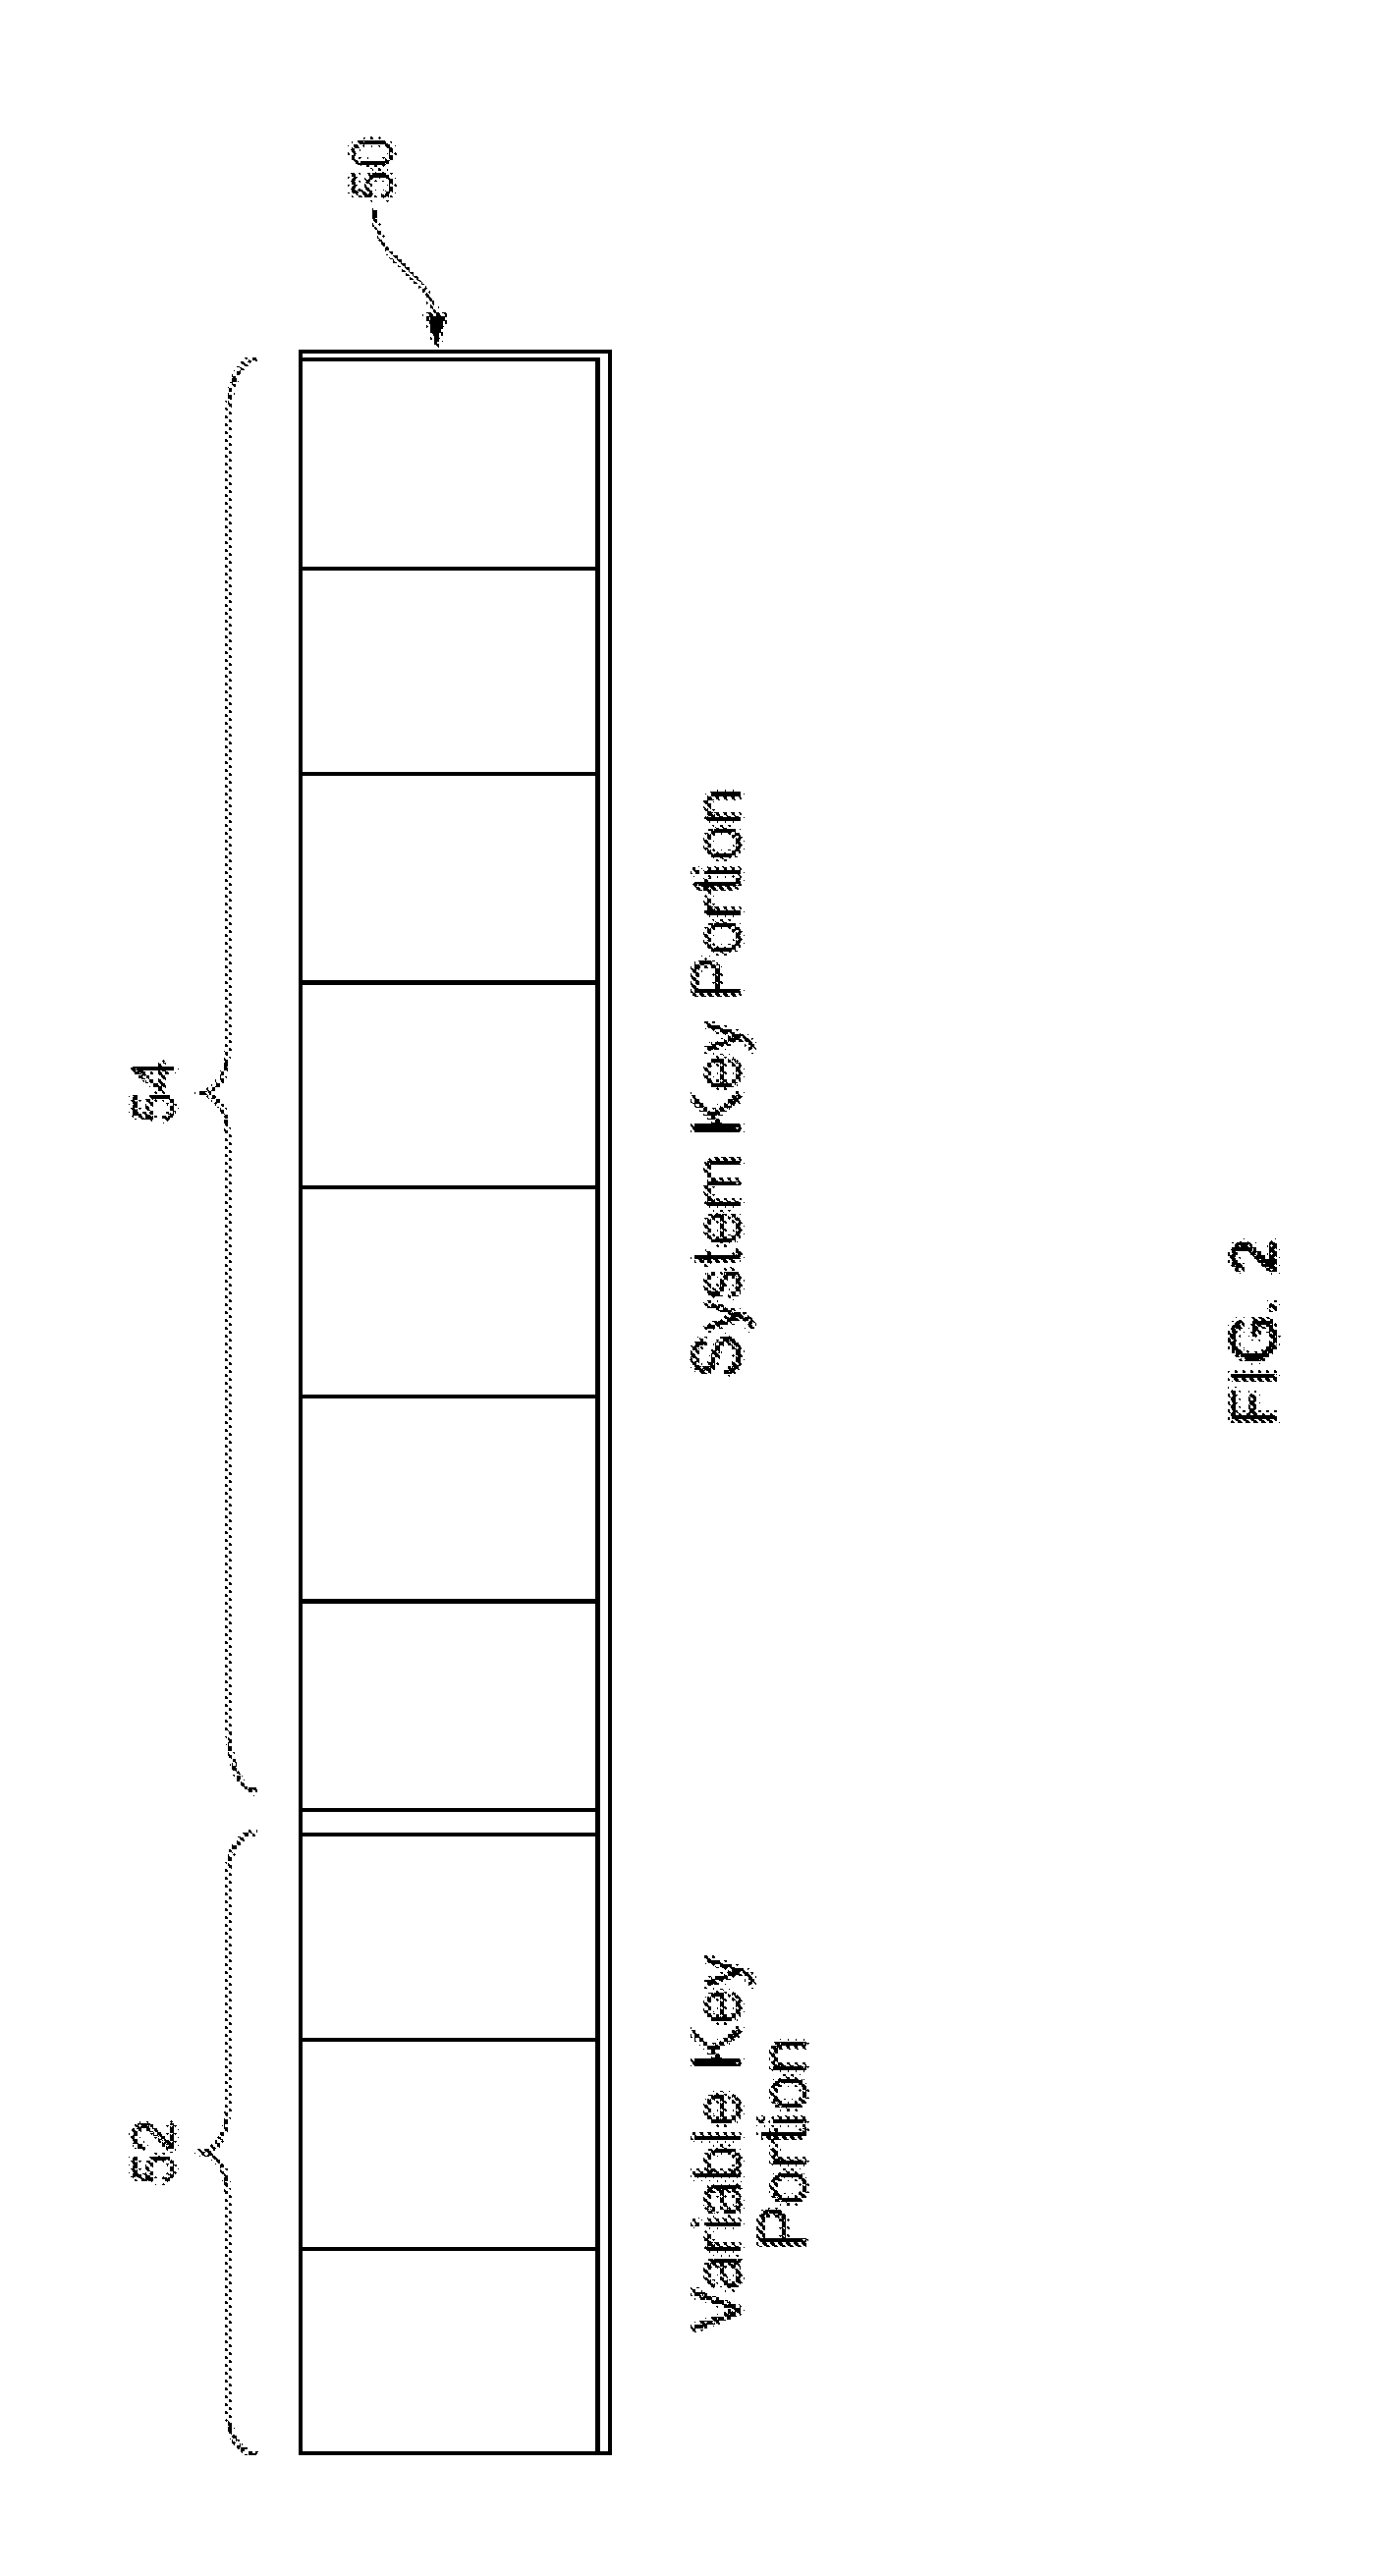 System and Method for Monitoring Attempted Network Intrusions